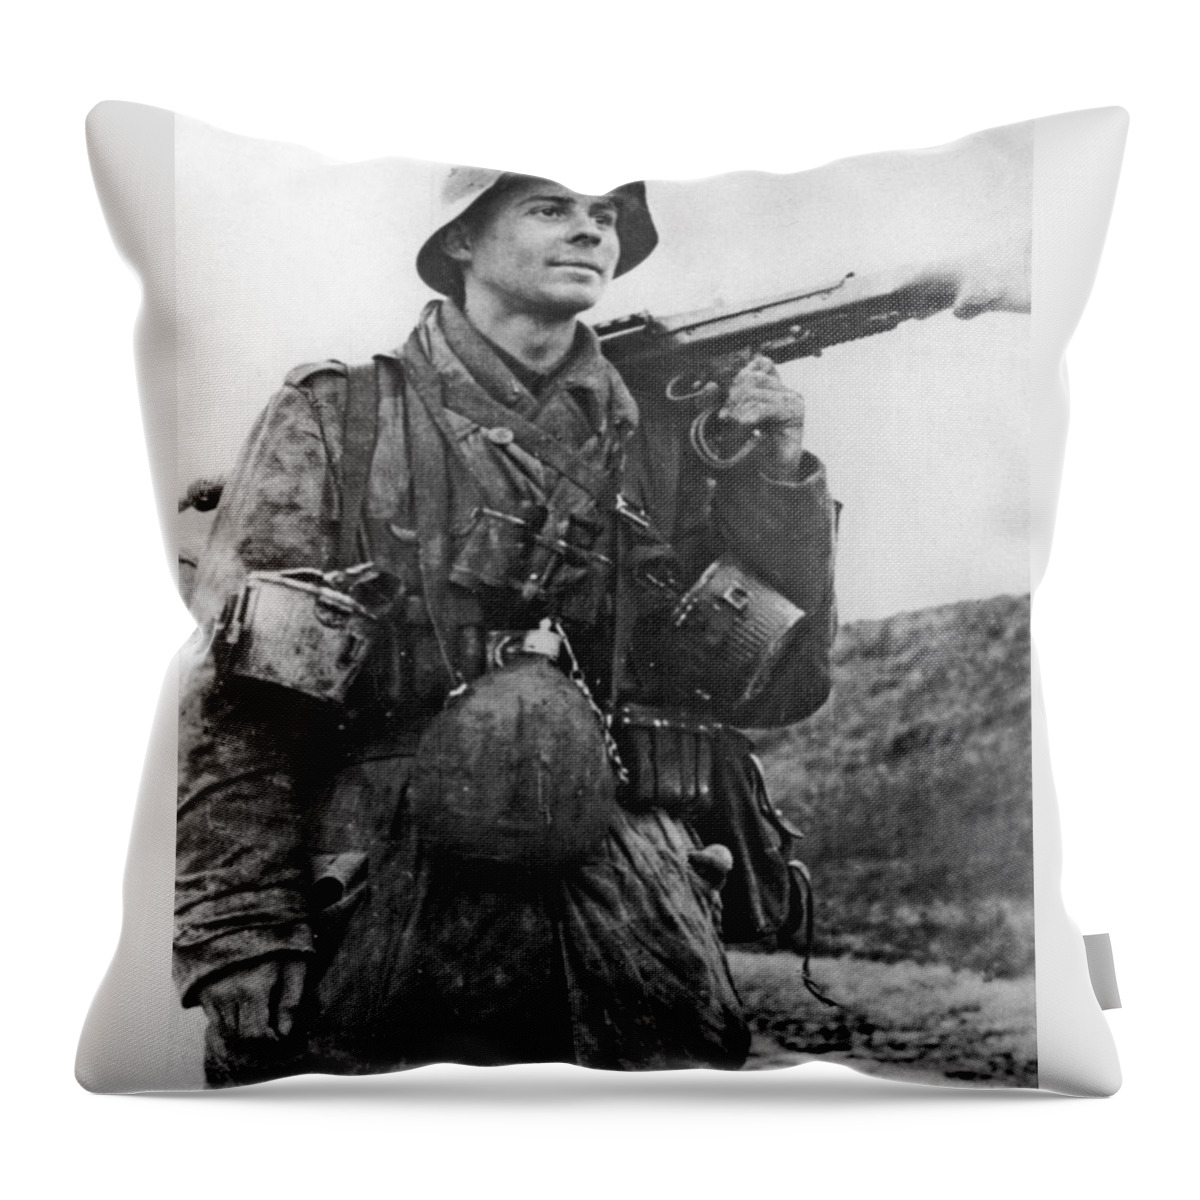 Mg 15 Machine Gunner In The Cockpit Of A Dornier Do 17 Bomber Throw Pillow featuring the painting MG 15 machine gunner in the cockpit of a Dornier Do 17 bomber by MotionAge Designs